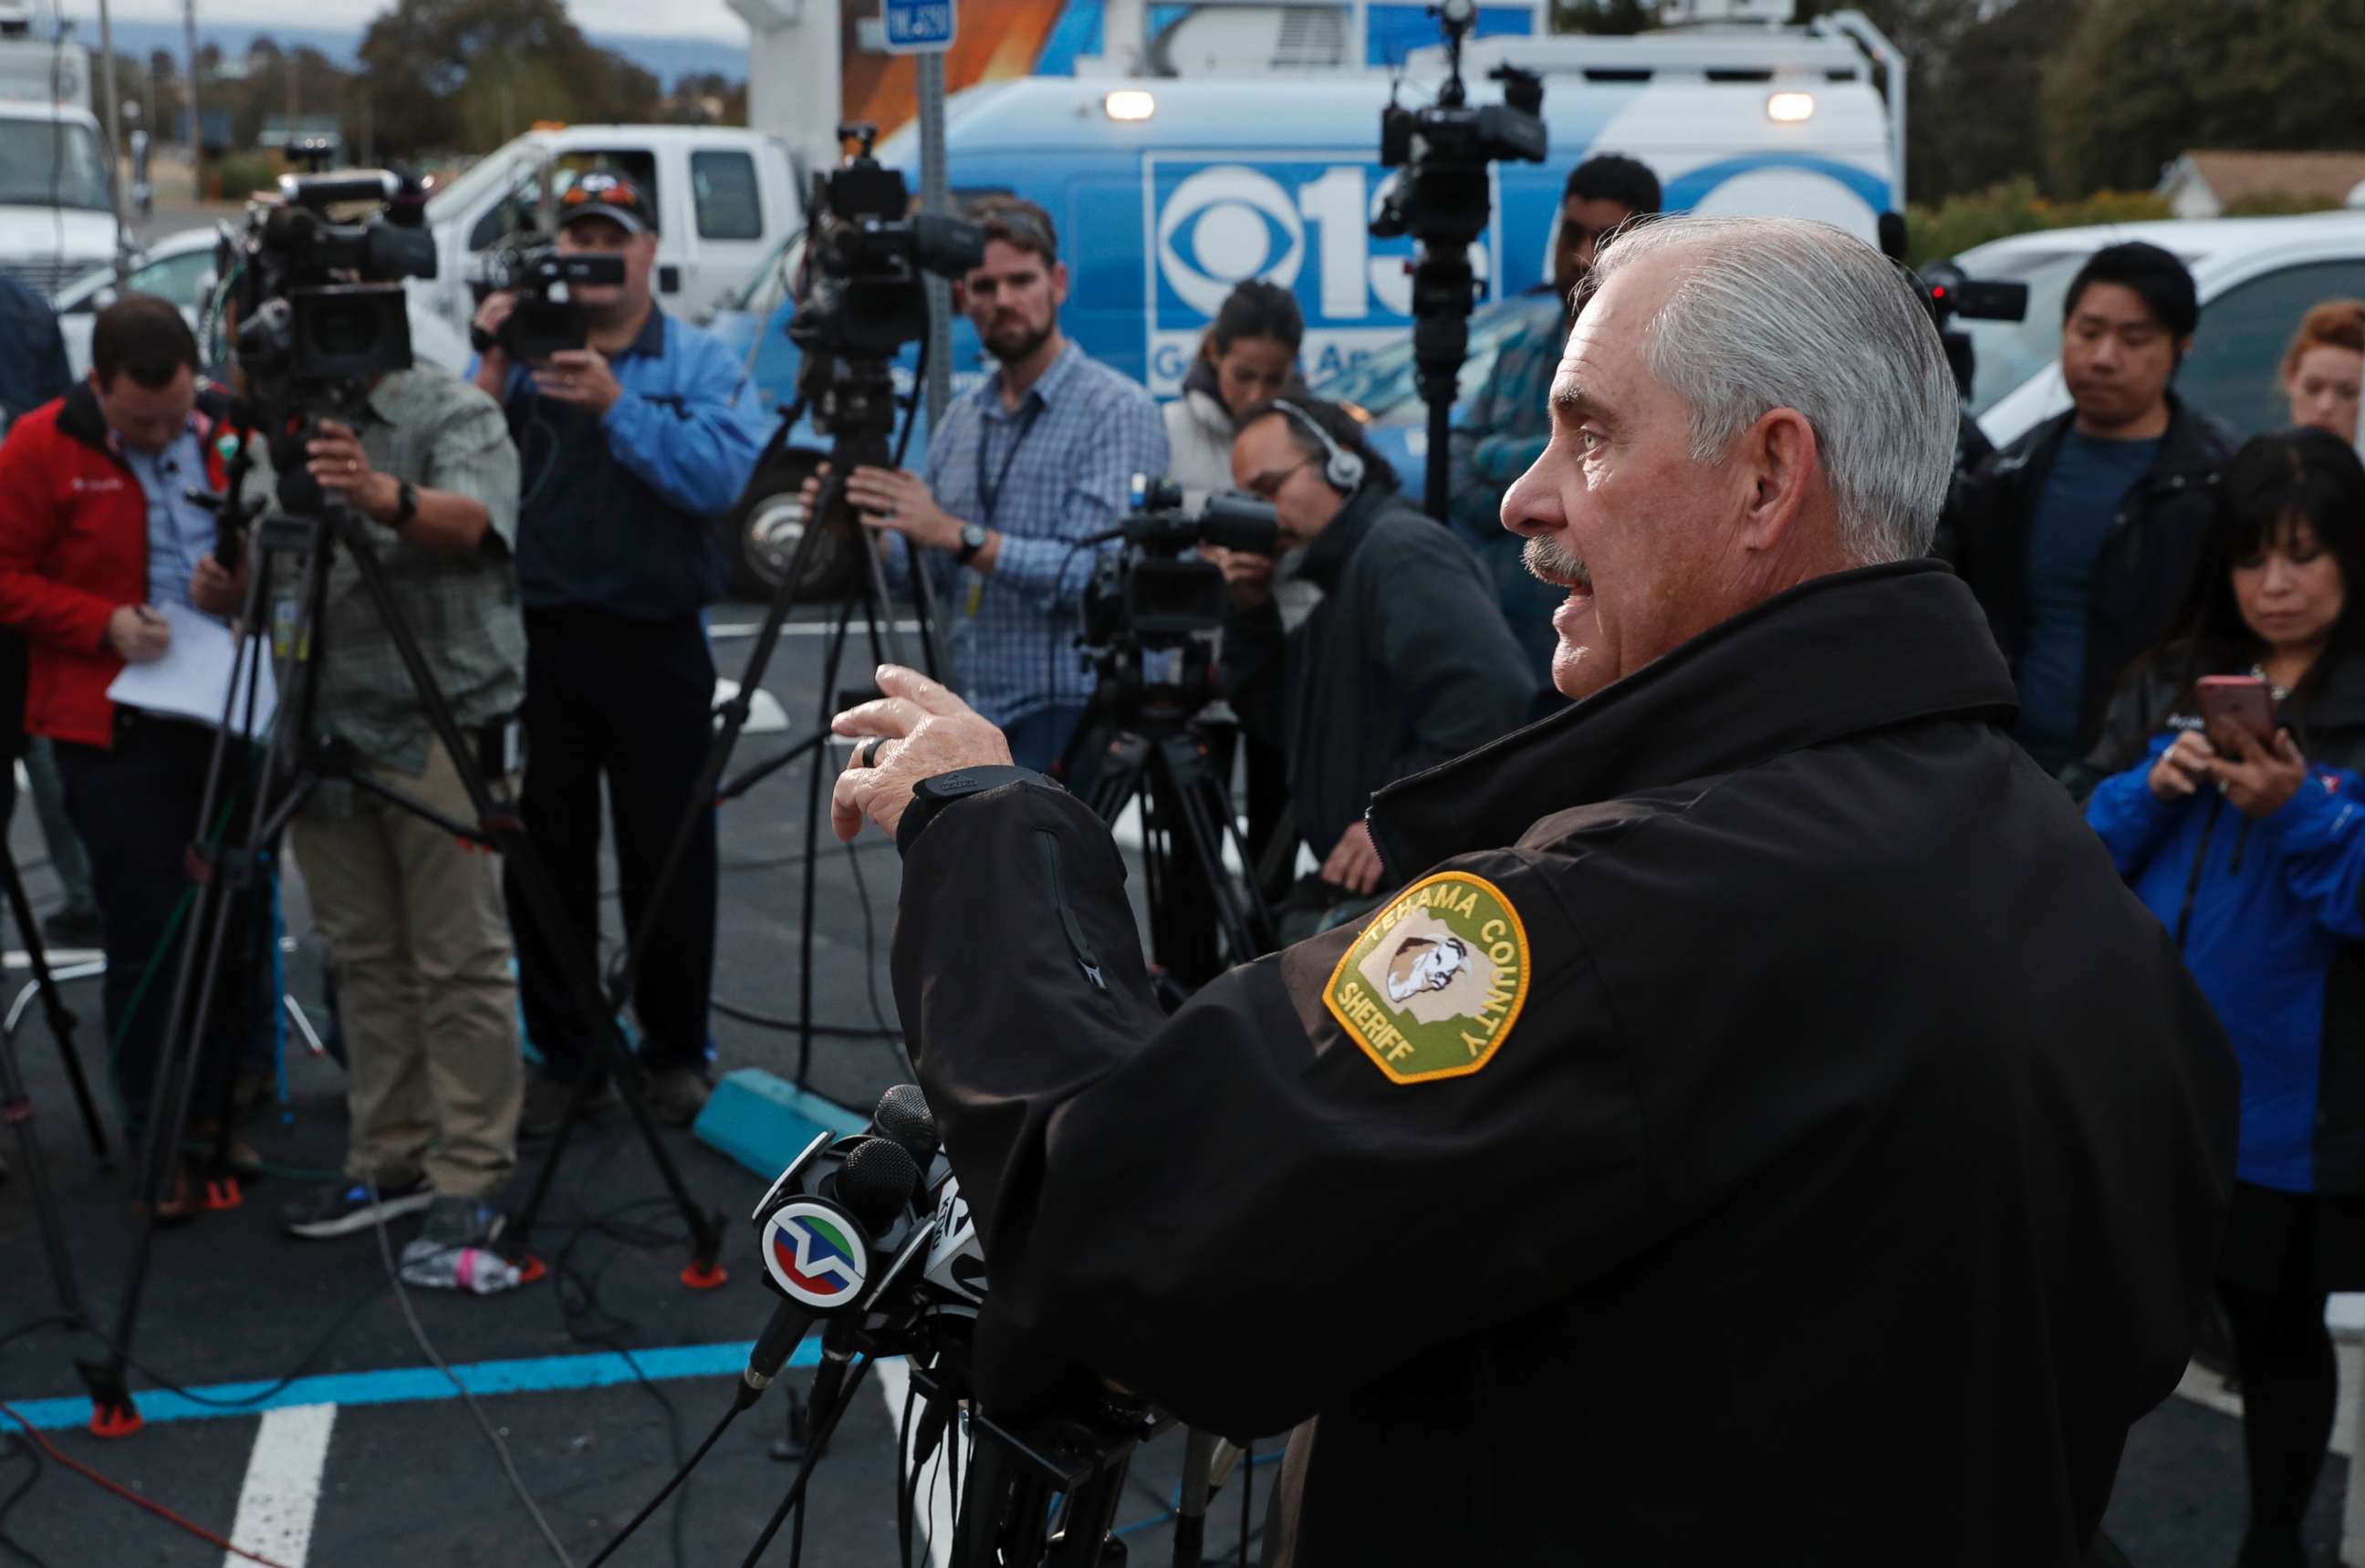 PHOTO: Tehama county assistant Sheriff Phil Johnston holds a briefing in the small community of Rancho Tehama, Calif. where a gunman killed at least four people in a violent rampage, Nov. 14, 2017.